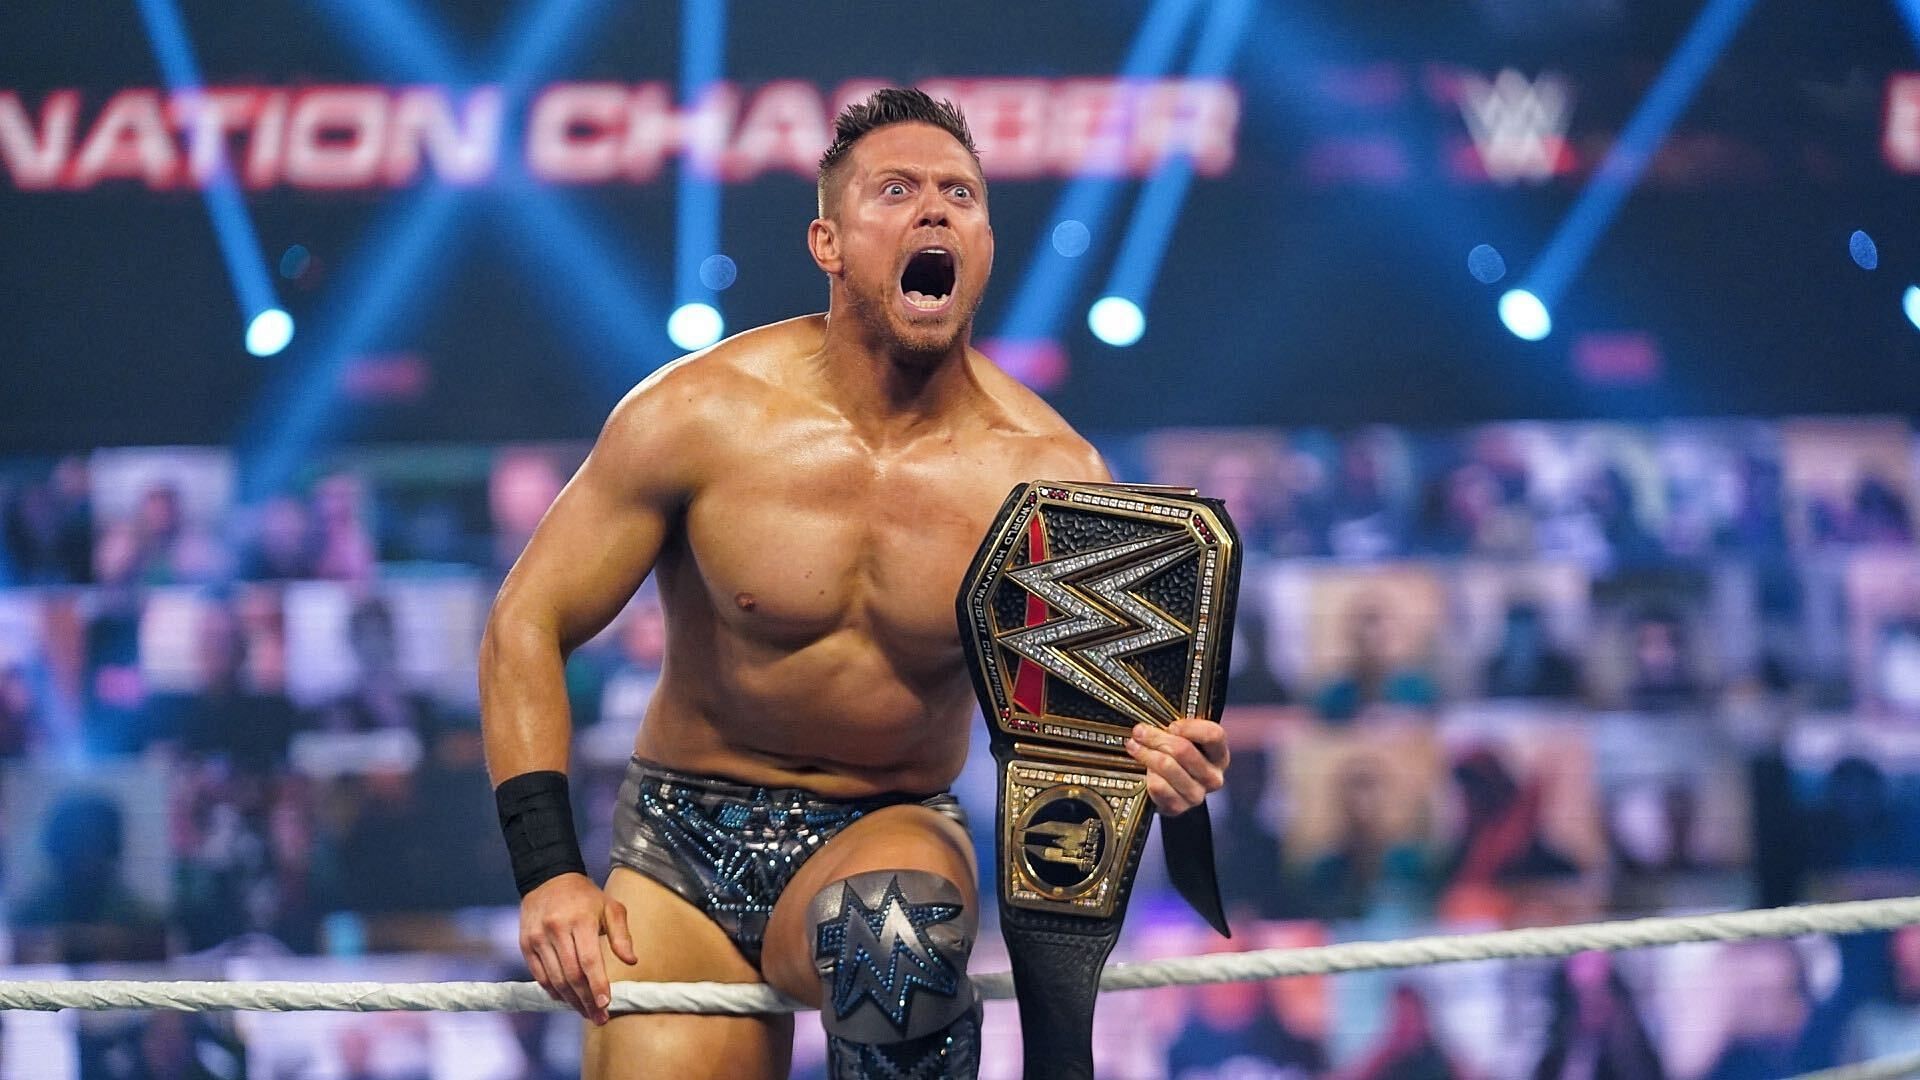 Once upon a time, The Miz was THE man!